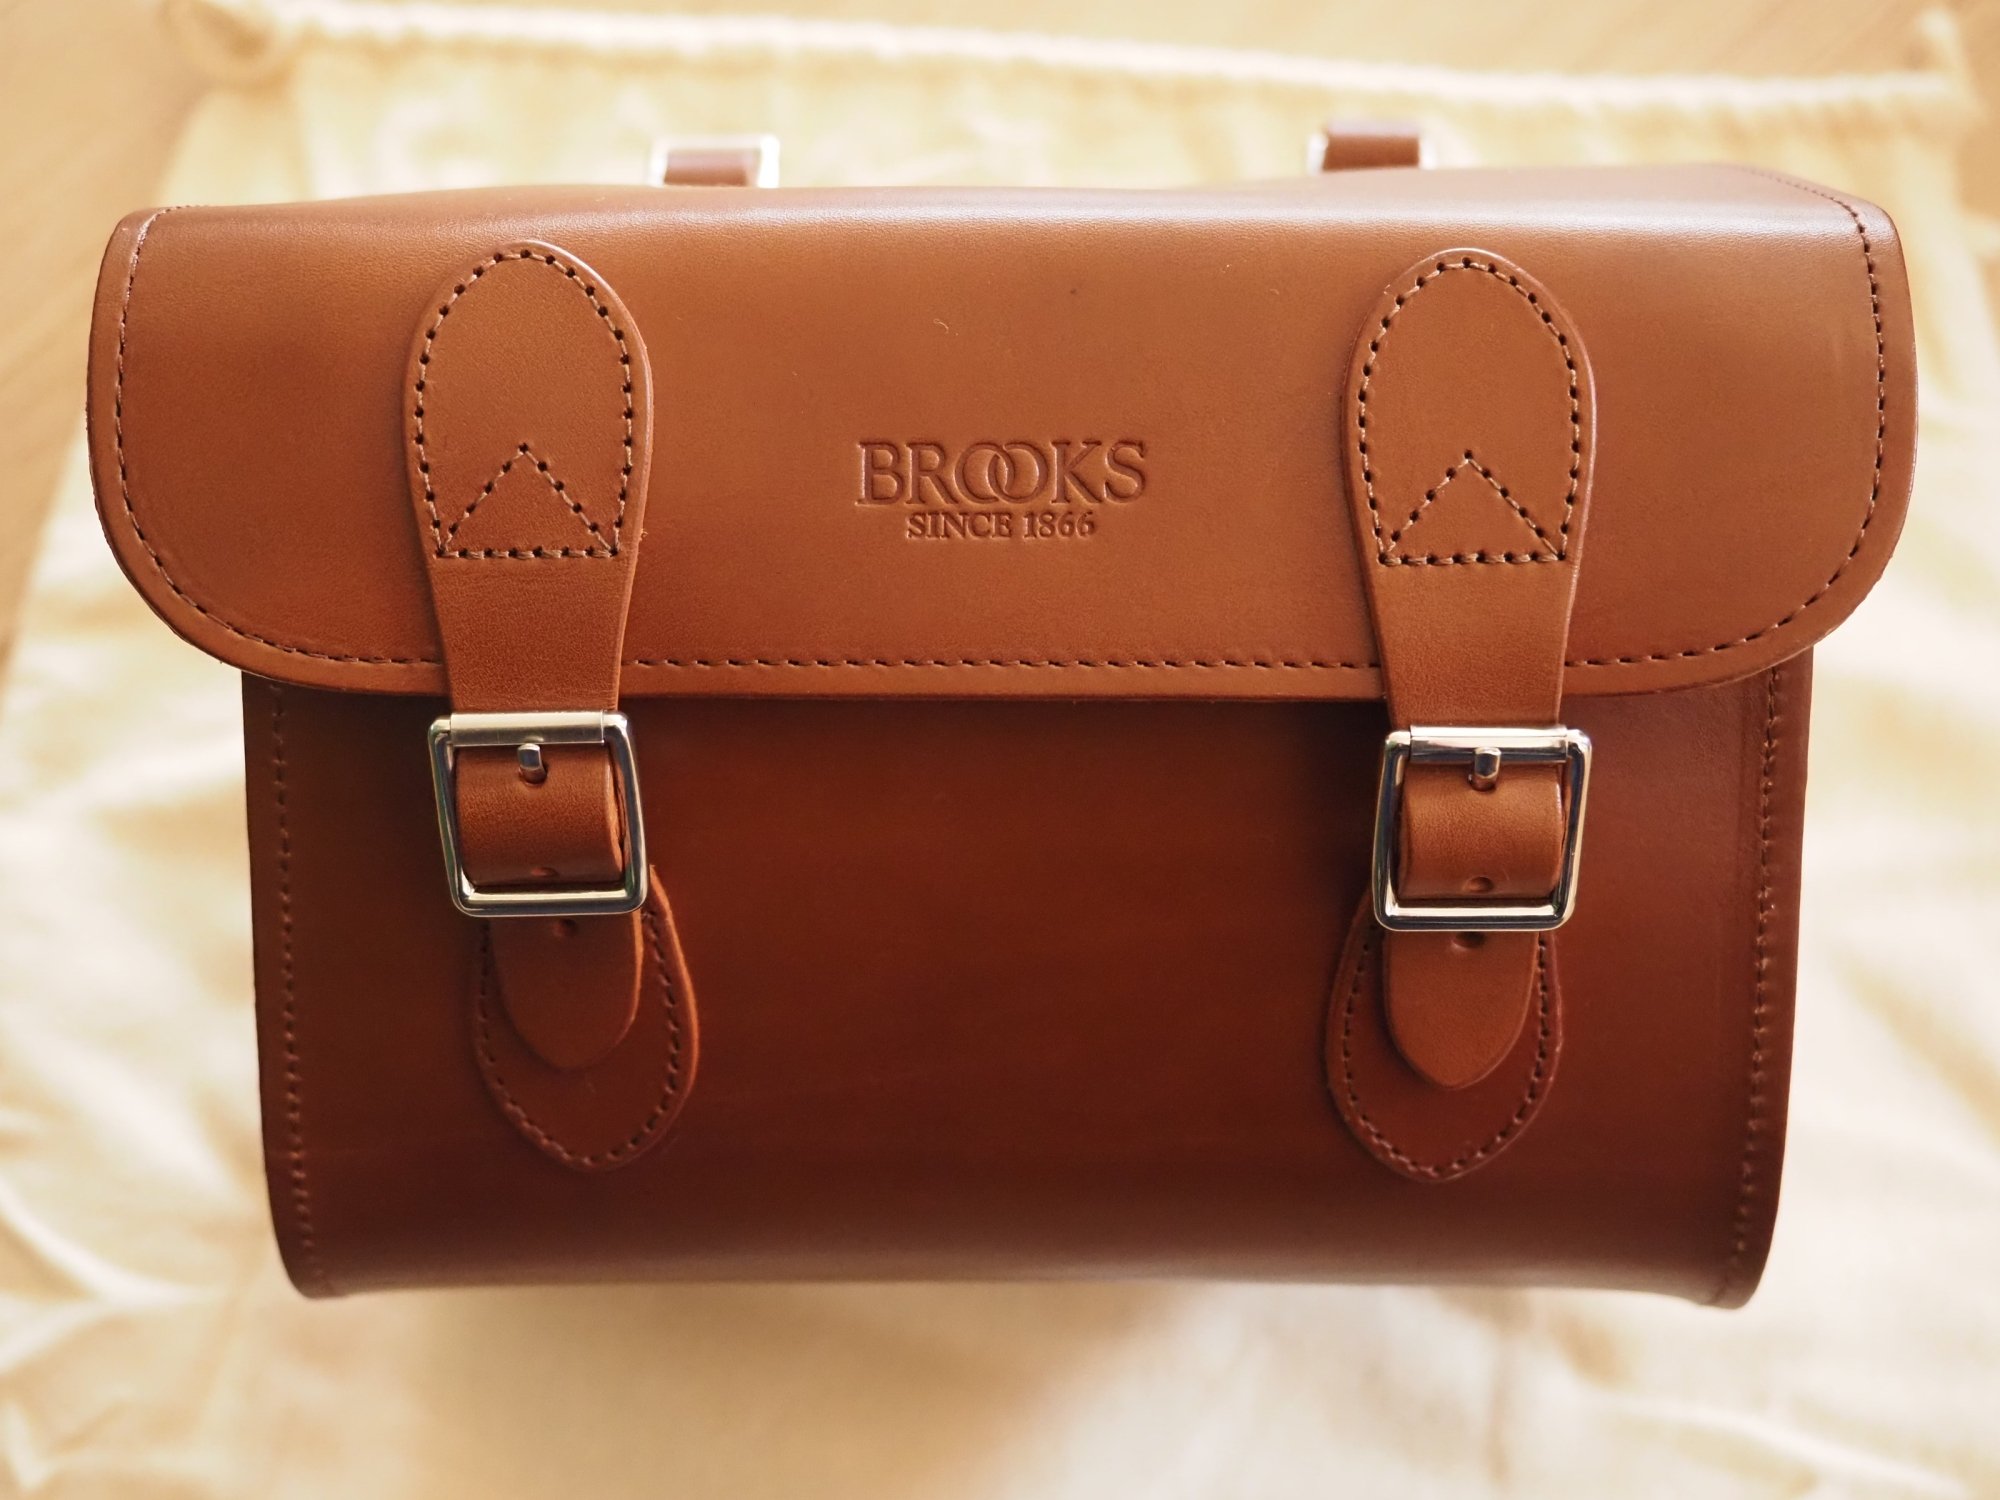 <img class='new_mark_img1' src='https://img.shop-pro.jp/img/new/icons13.gif' style='border:none;display:inline;margin:0px;padding:0px;width:auto;' />BROOKS MILLBROOK HOLDALL LEATHER BAGʥ֥饦